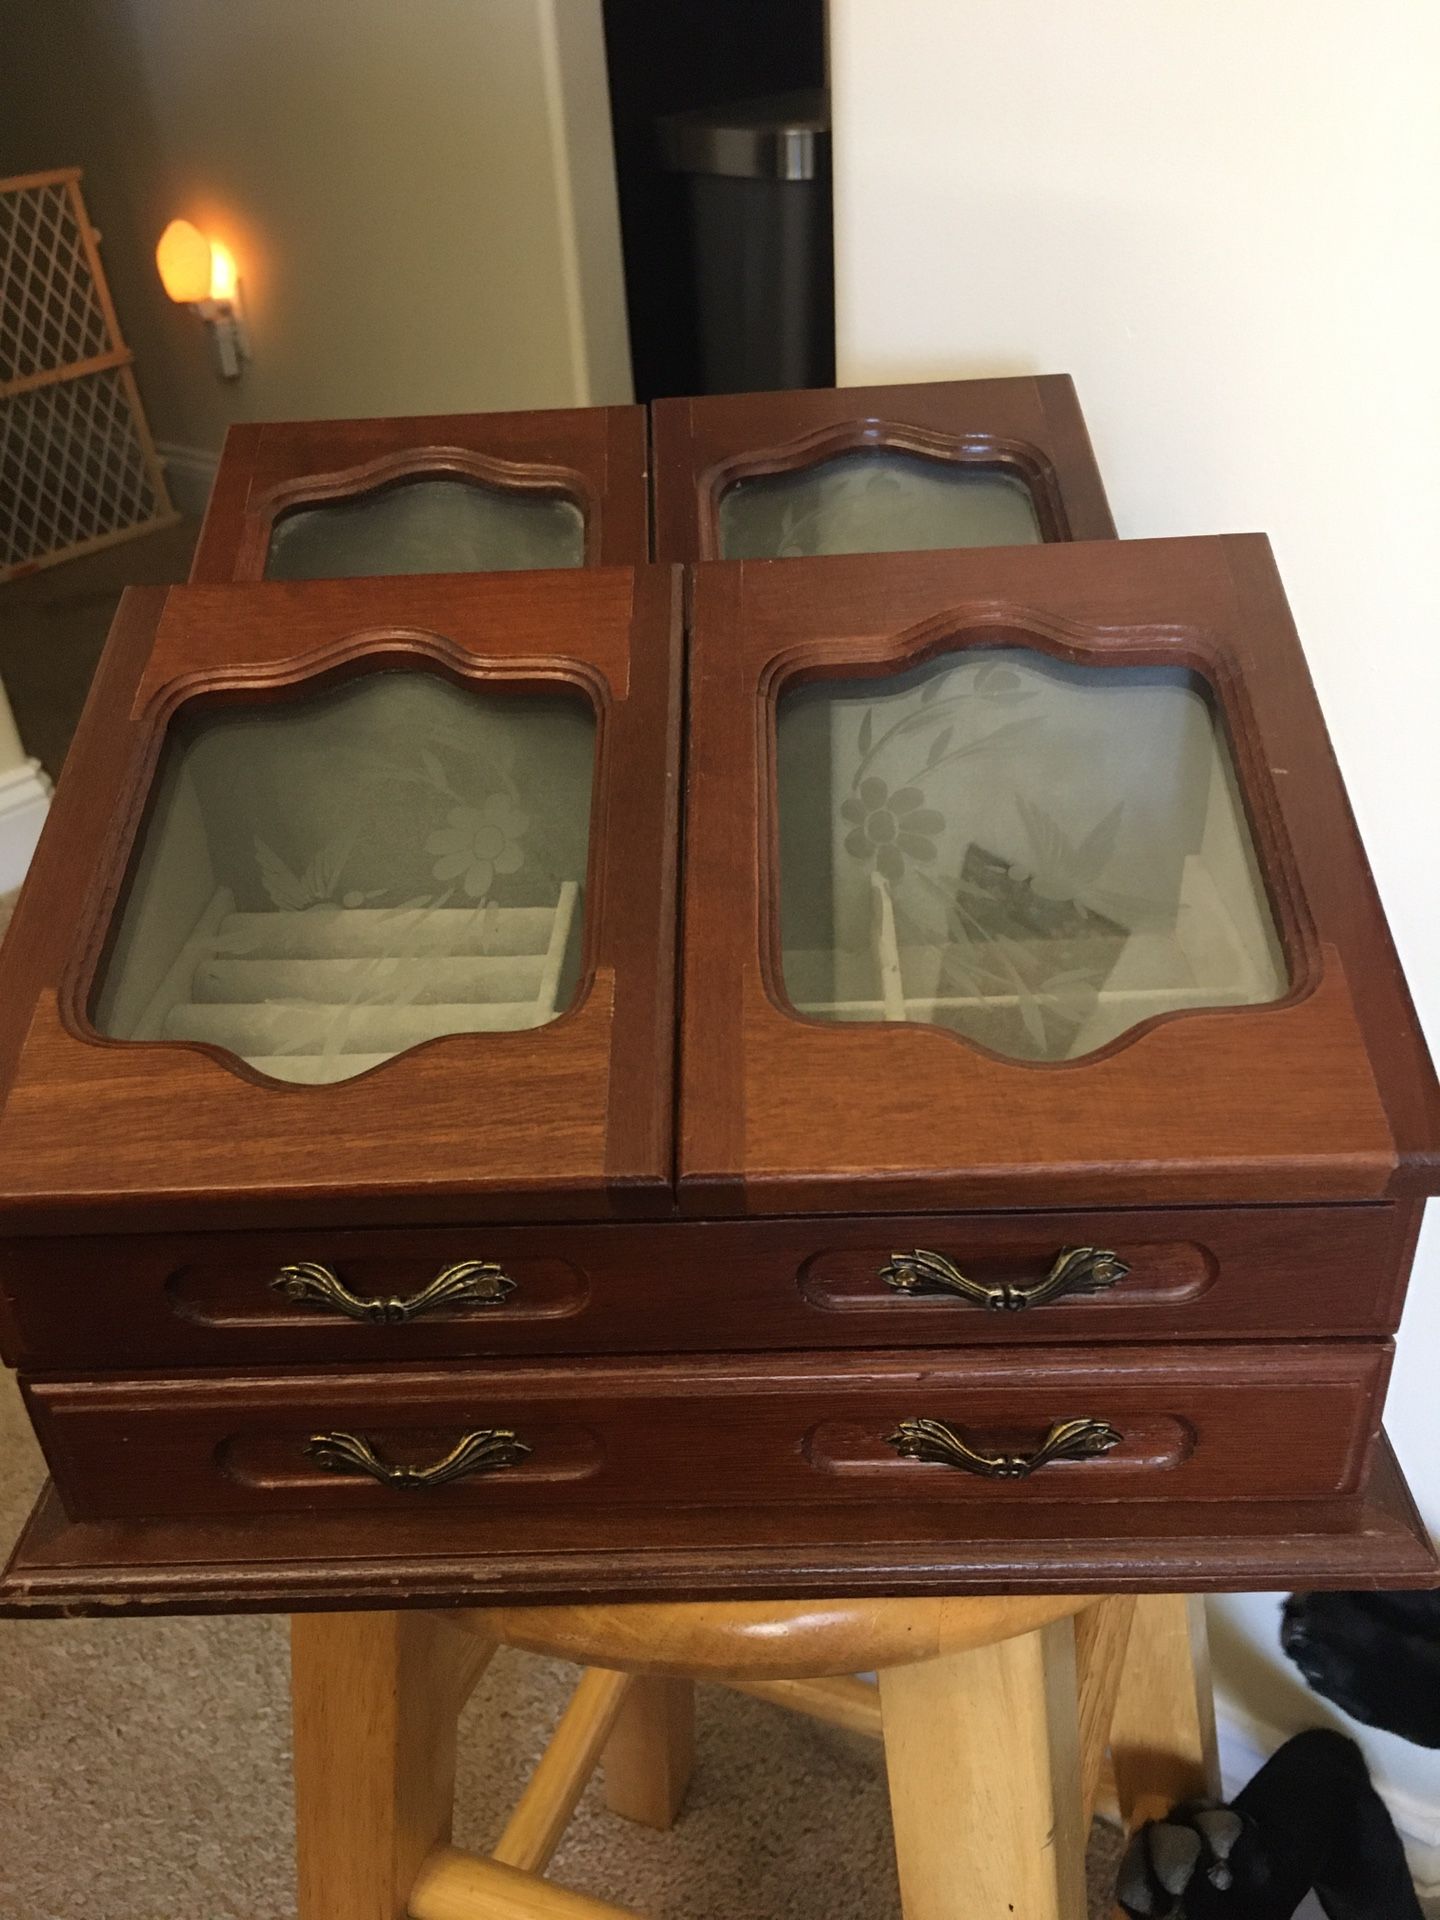 2 Wooden Jewelry Boxes